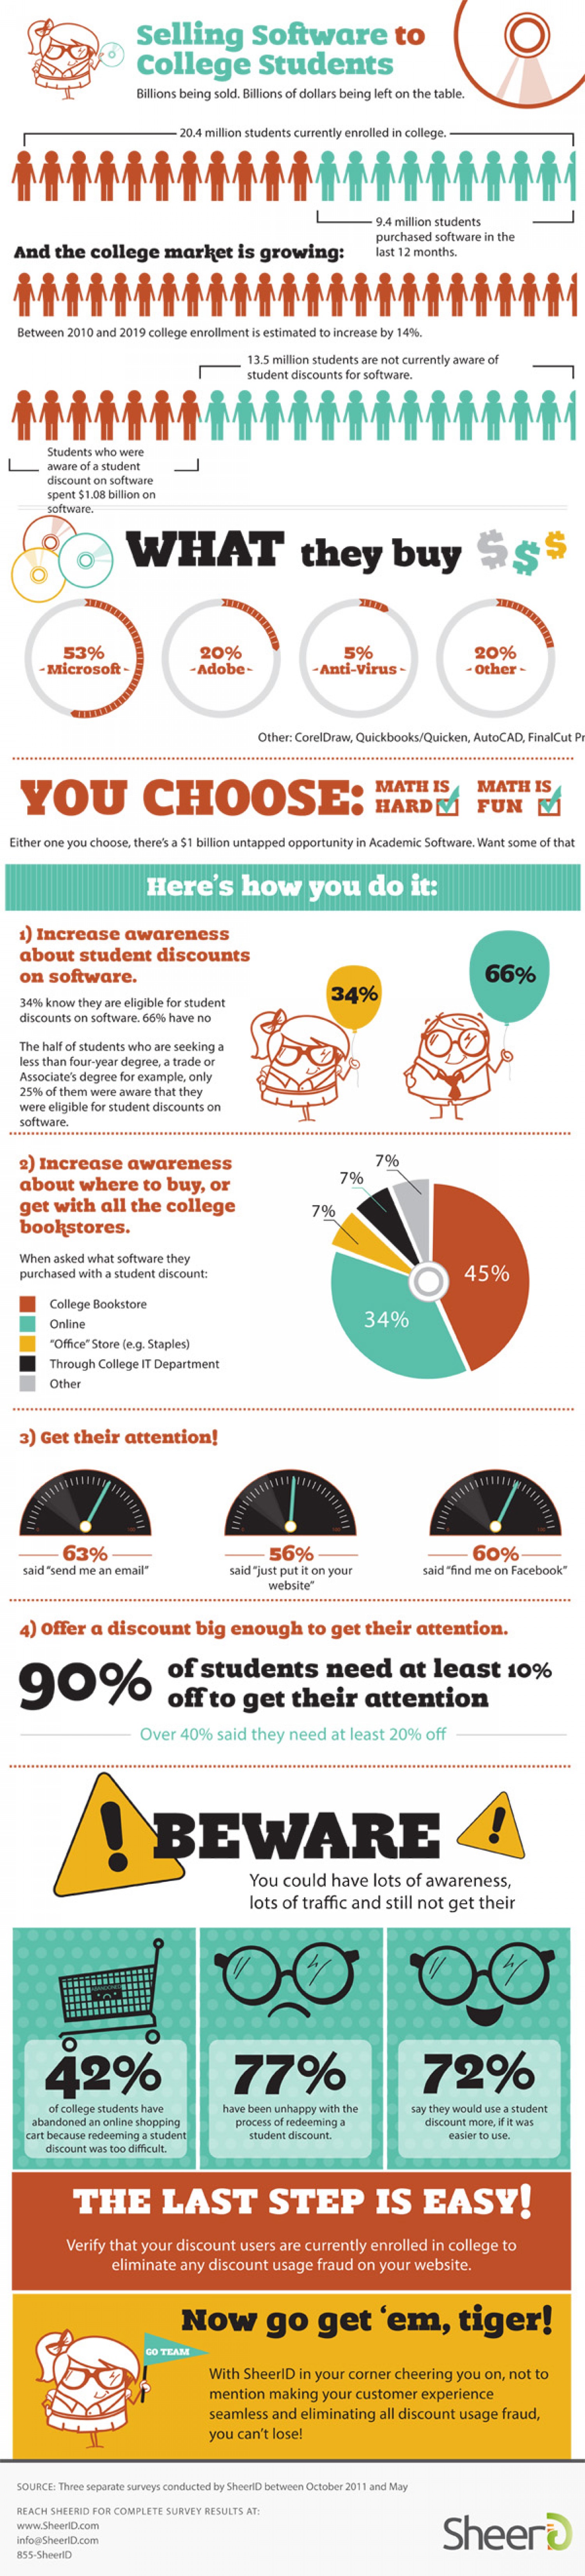 10. Selling Software to College Students